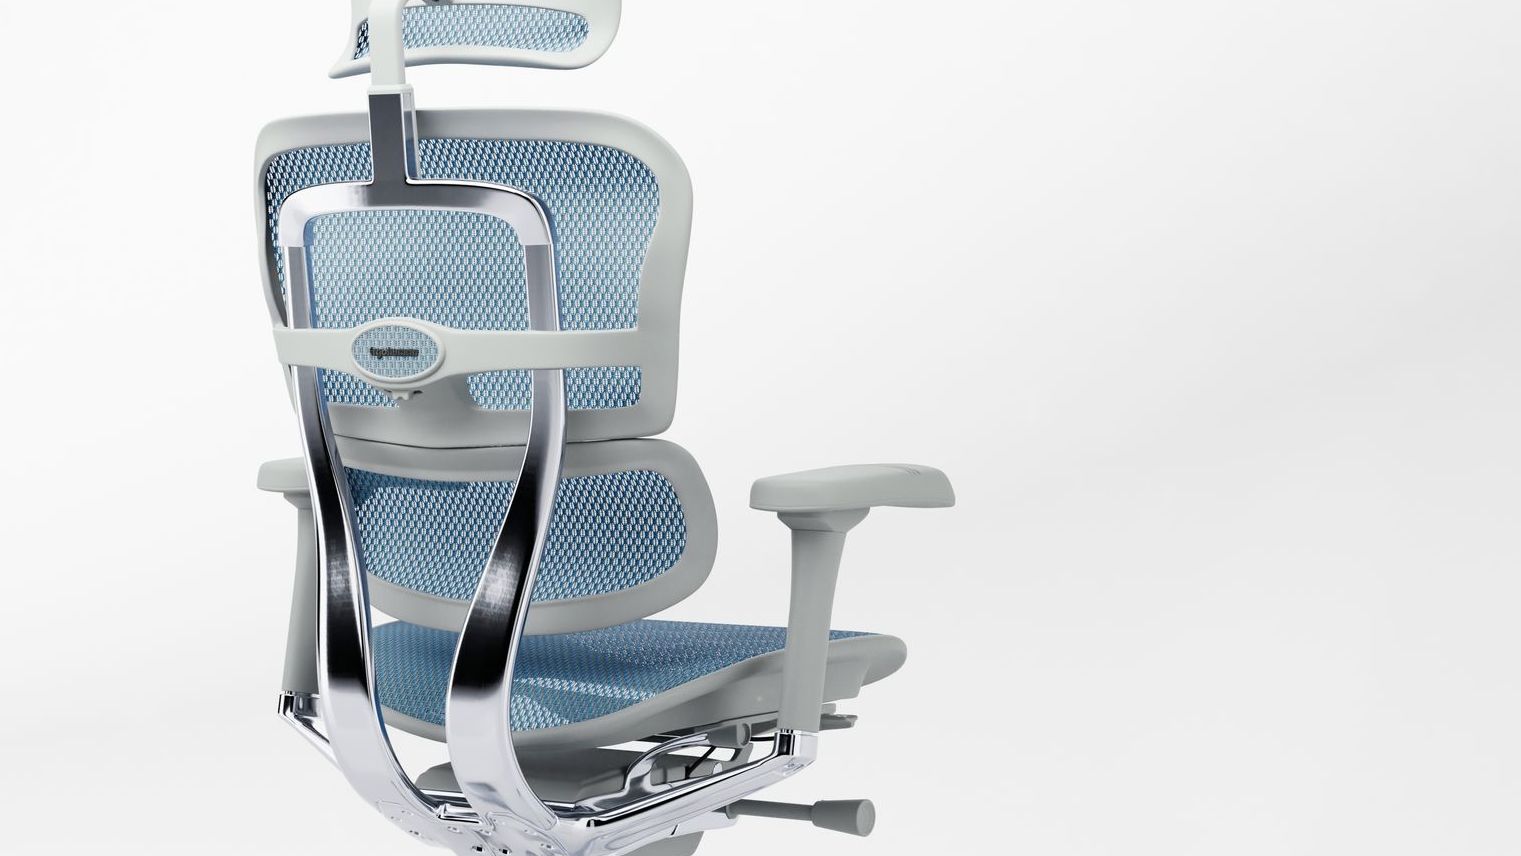 Rear view of an Ergohuman Elite office chair with a grey frame and blue mesh upholstery